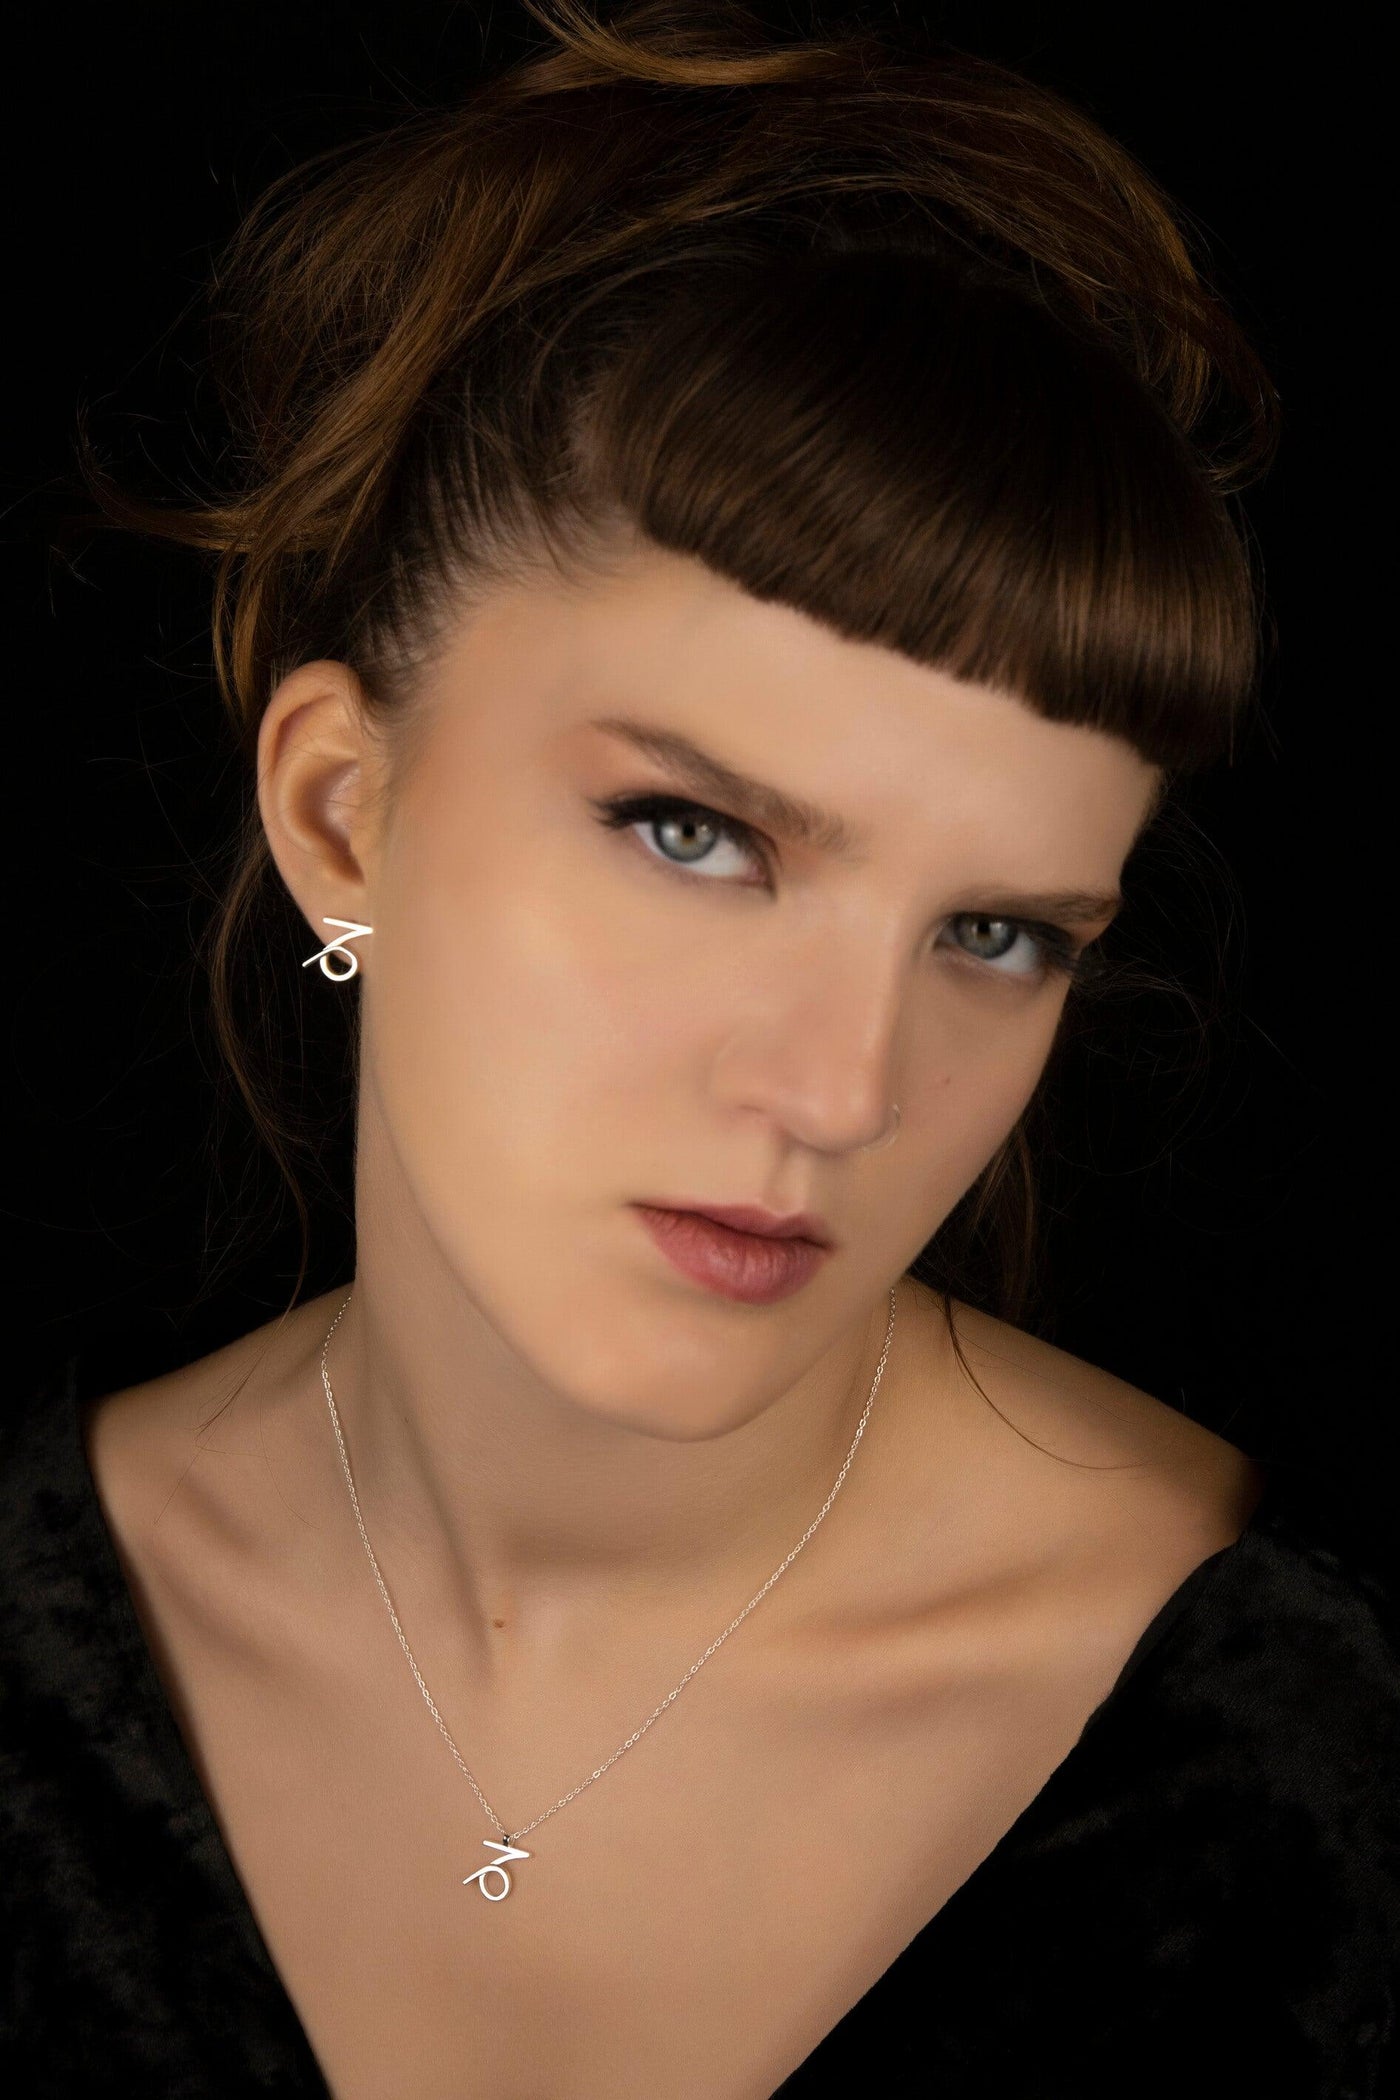 Unisex Capricorn Earrings and Necklace in Sterling Silver 925.